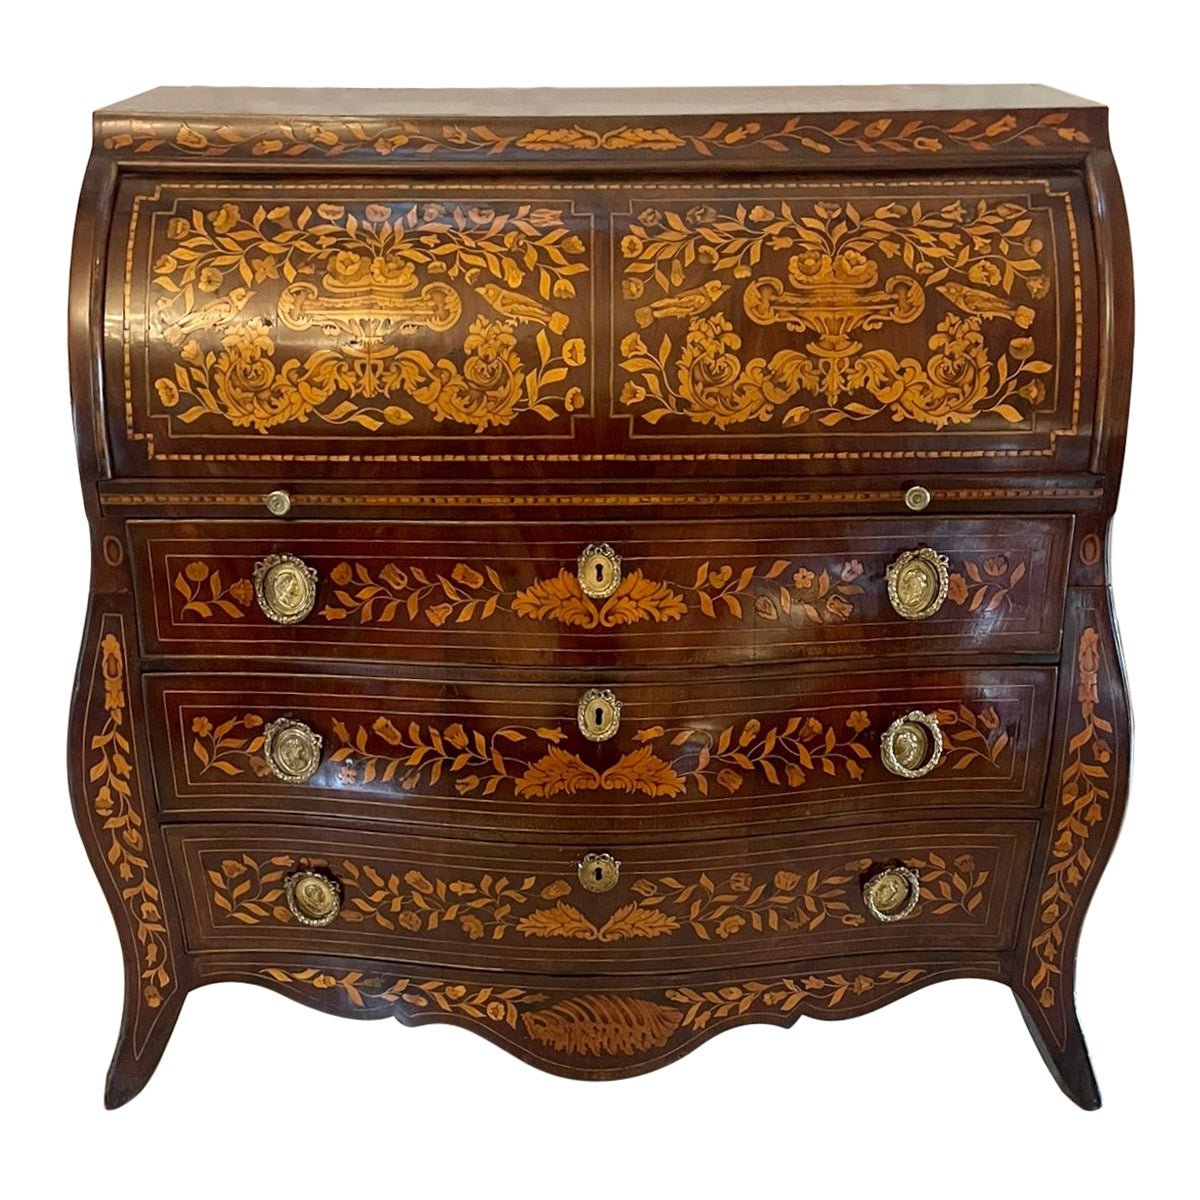 Antique 18th Century Quality Mahogany Floral Marquetry Inlaid Cylinder Bureau For Sale